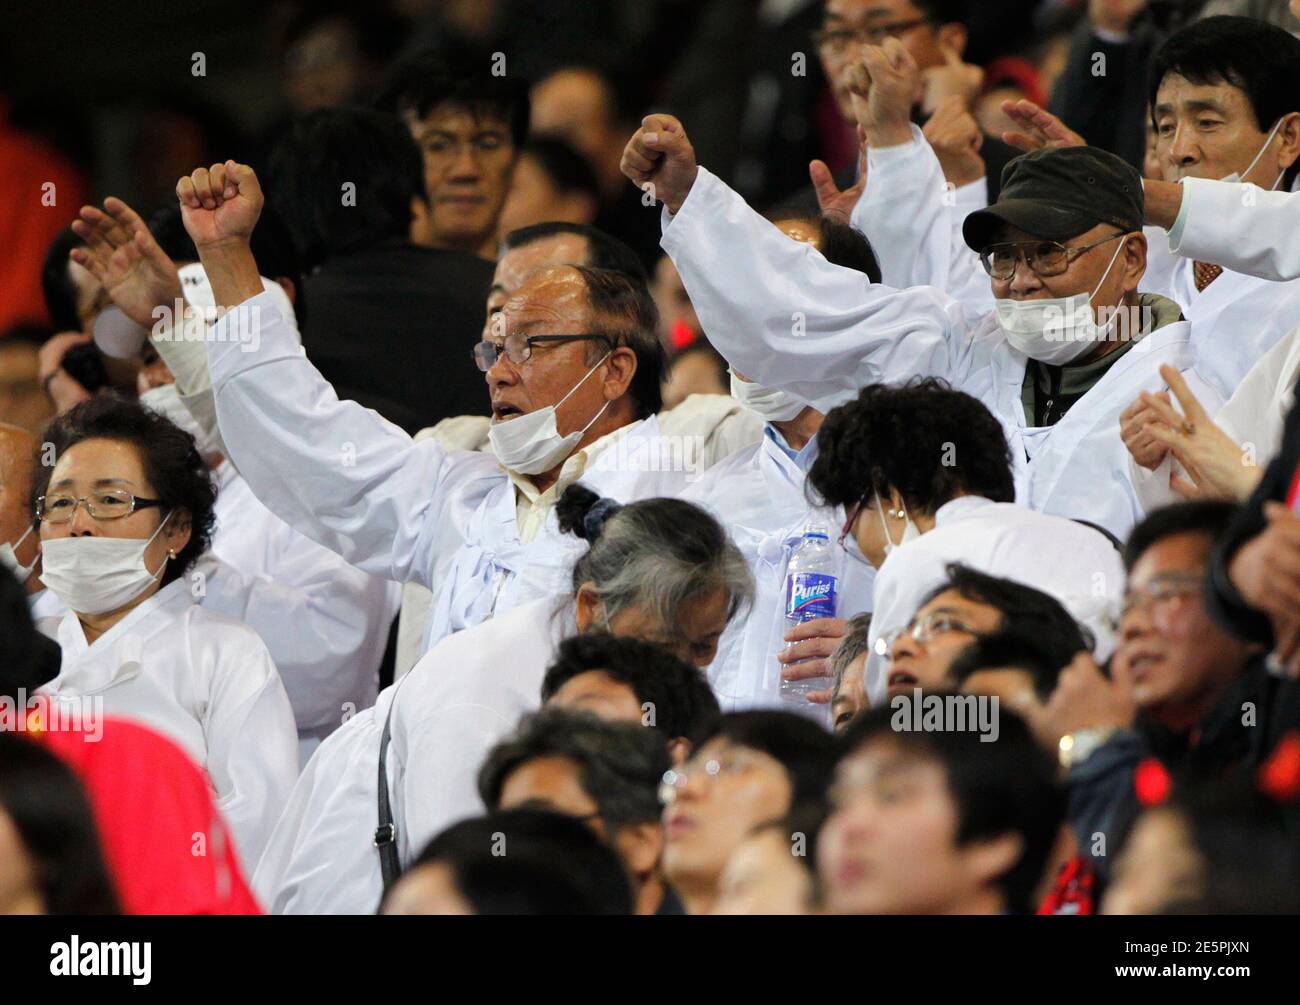 Members (wearing white clothes) of the Association for the Pacific War Victims shout slogans during an anti-Japan rally demanding full compensation from the Japanese government during a friendly soccer match between South Korea and Japan in Seoul October 12, 2010.  REUTERS/Jo Yong-Hak (SOUTH KOREA - Tags: SPORT SOCCER CIVIL UNREST POLITICS) Stock Photo